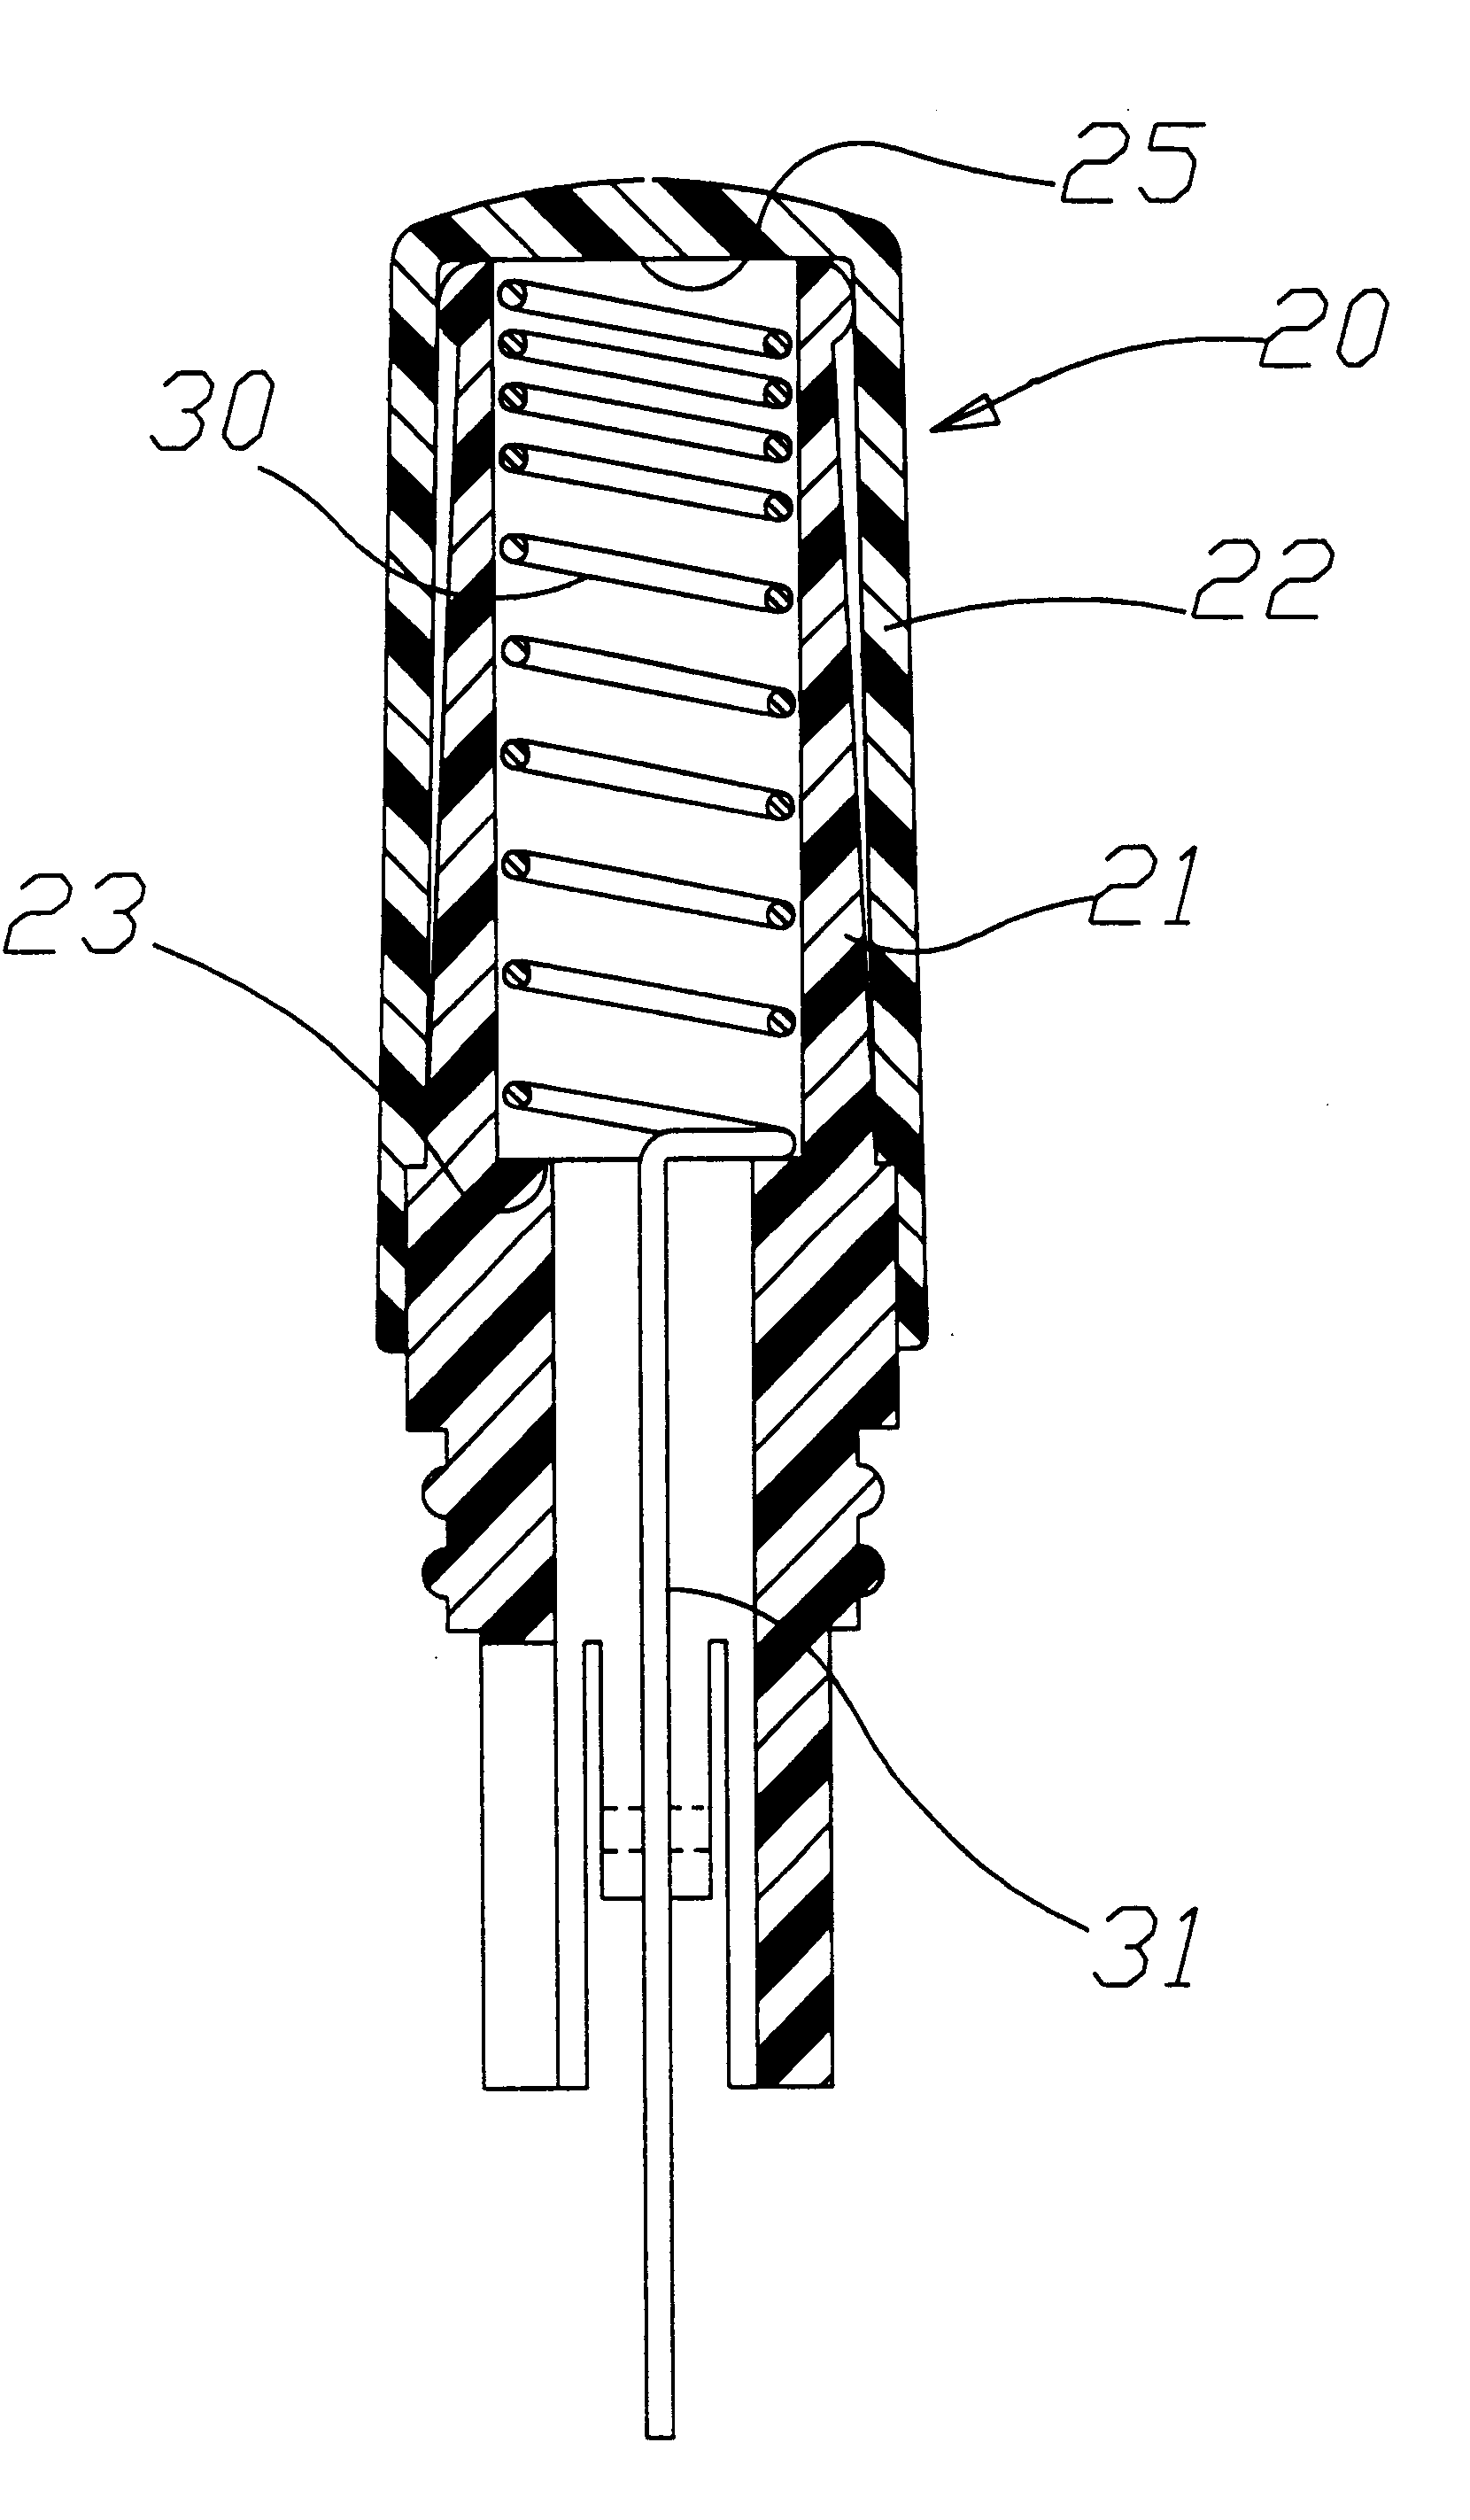 Simplified helical antenna structure for communication equipment